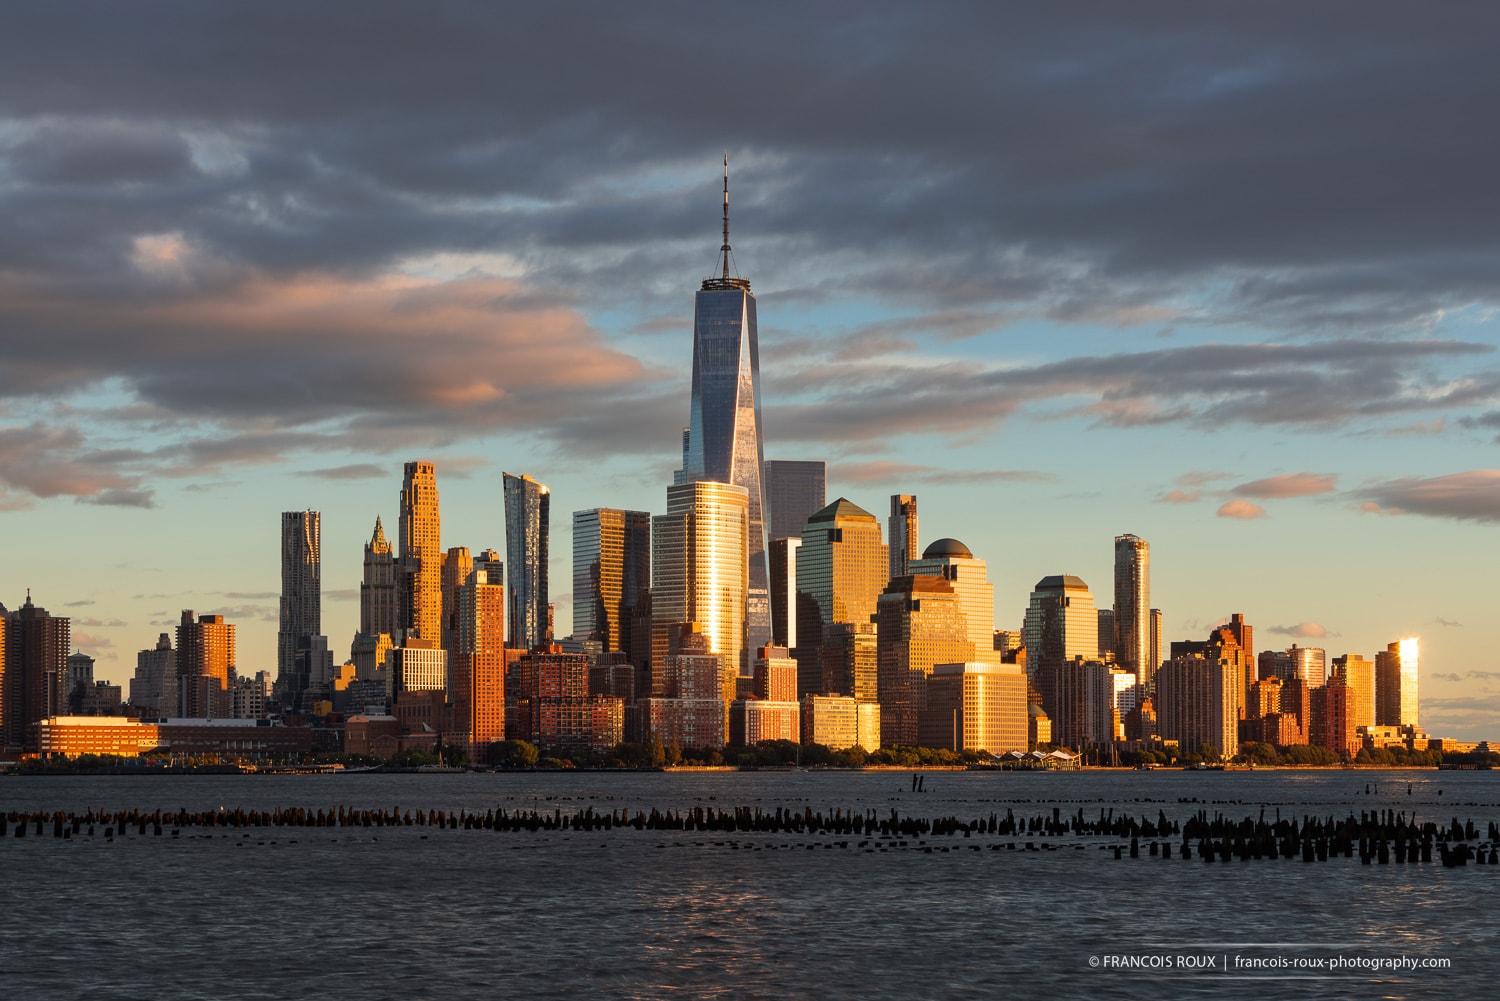 New York City skyline at sunset with World Trade Center skyscrapers